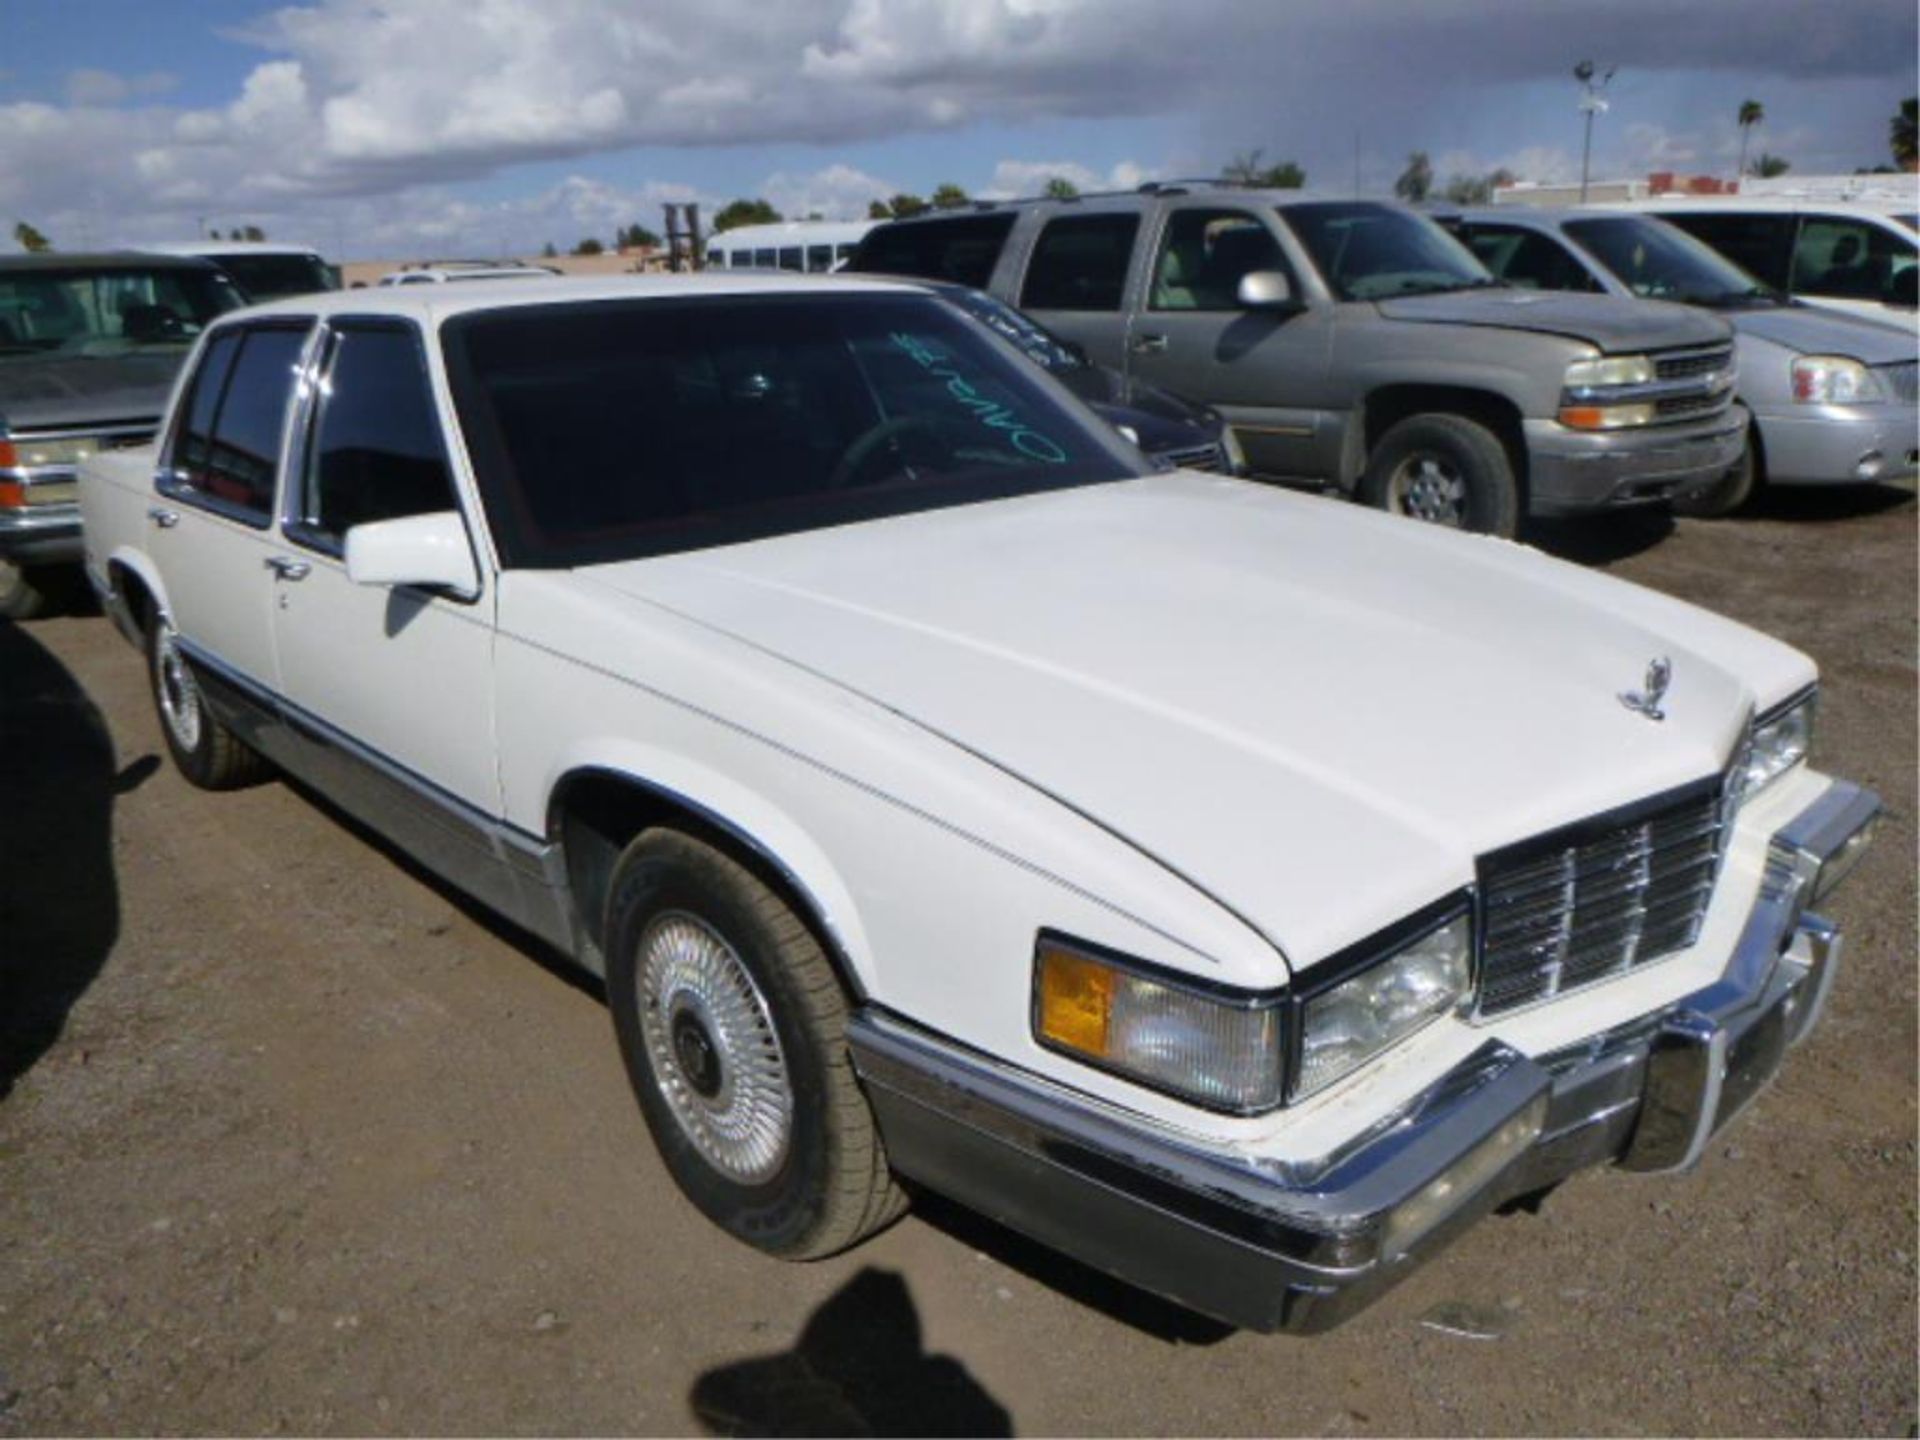 1992 Cadillac Deville - Image 2 of 14